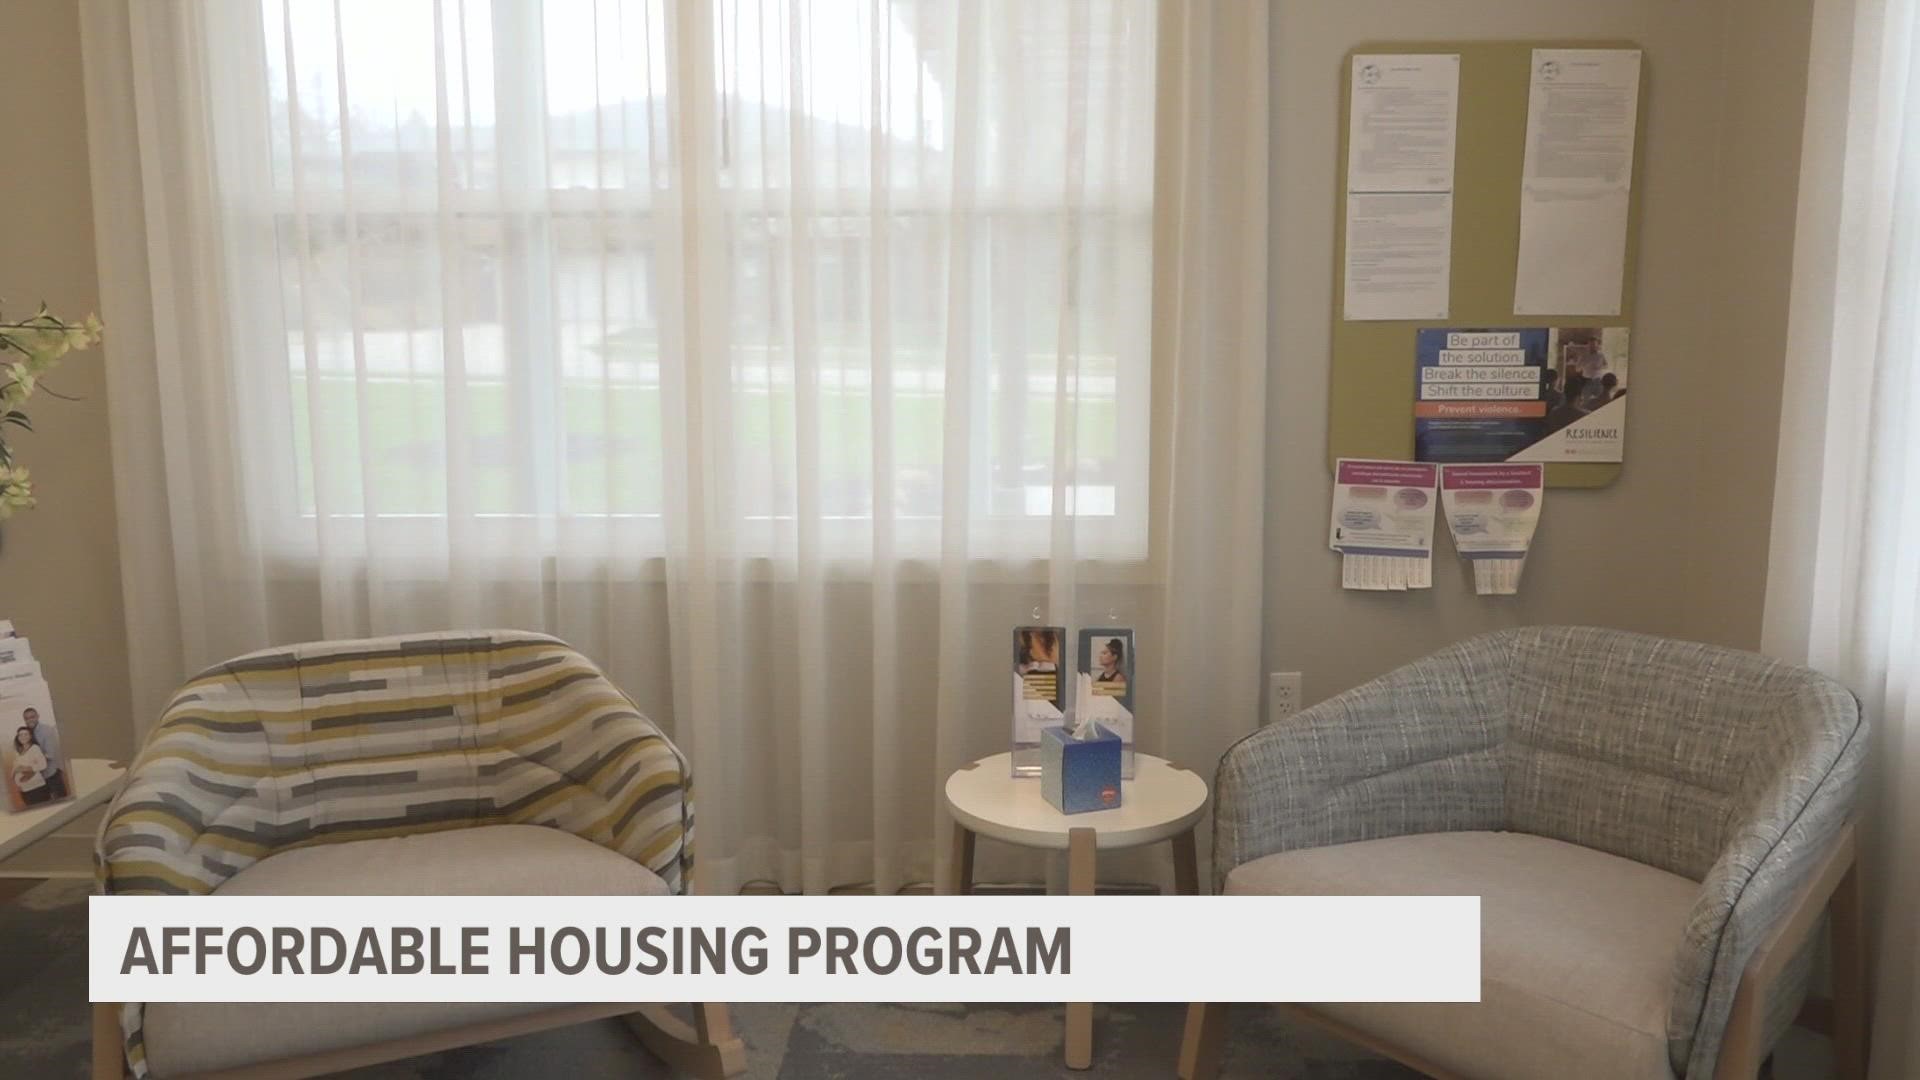 Struggling to adjust to life is hard for domestic violence survivors, which is why Safe Haven Ministries wants to help erase stress to find new housing after leaving